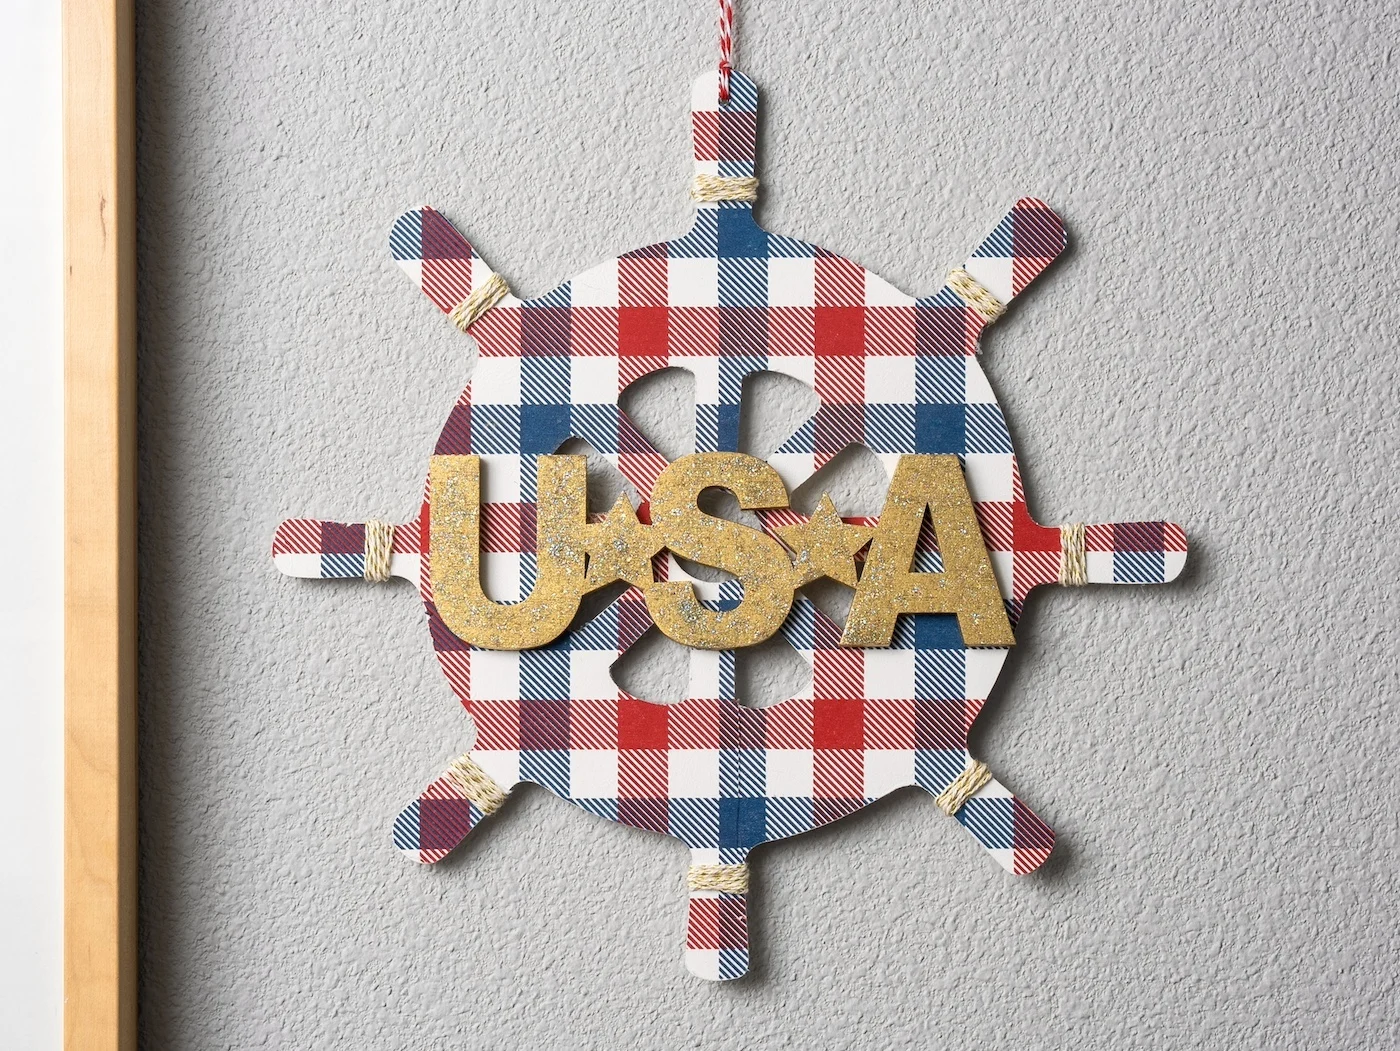 DIY 4th of July Wall Decor on a Budget